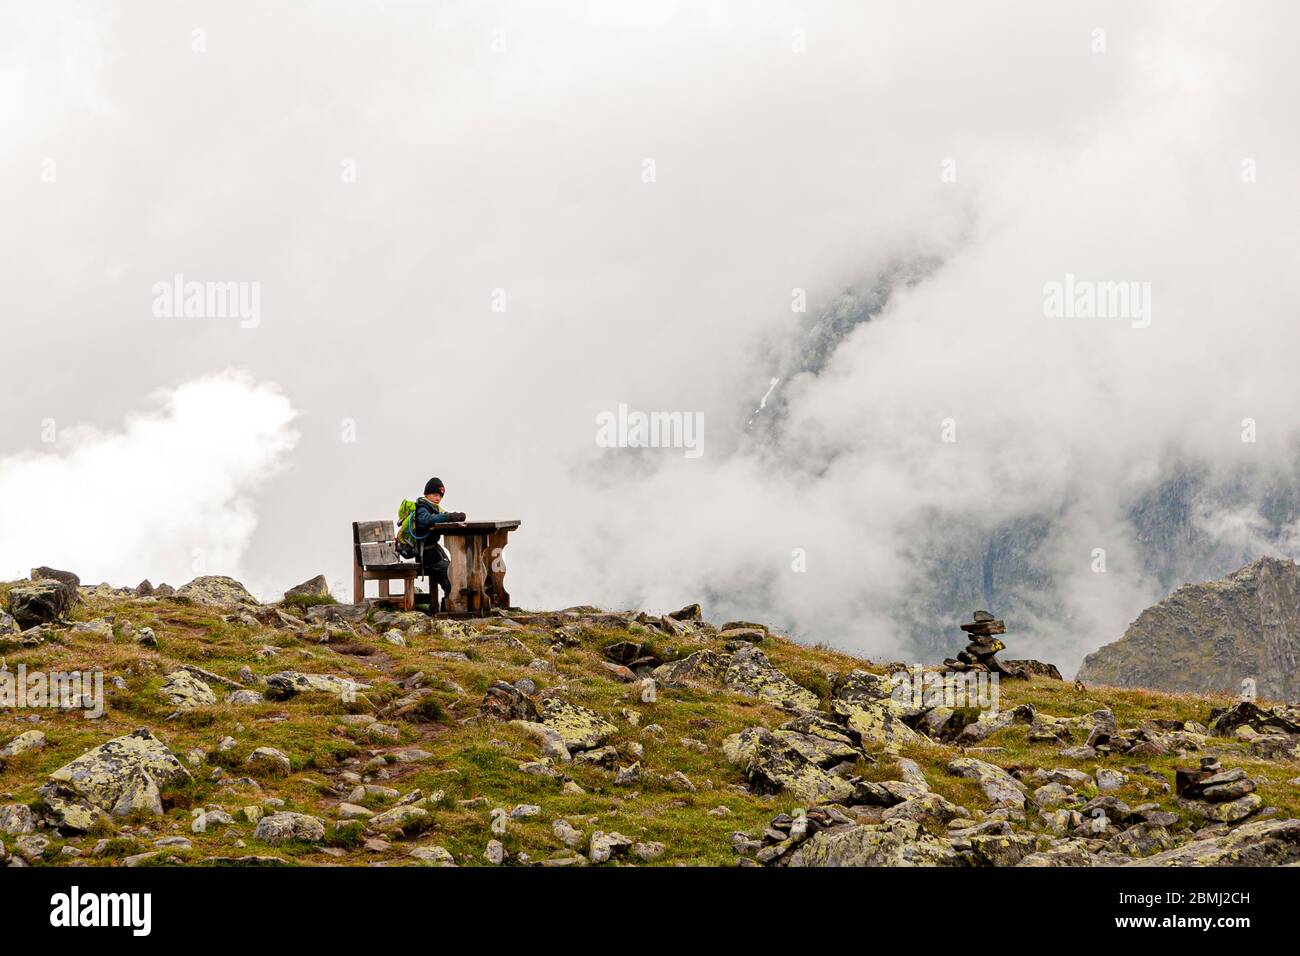 Young Boy picnicking alone in the foggy Mountains of Neustift im Stubaital, Austria Stock Photo